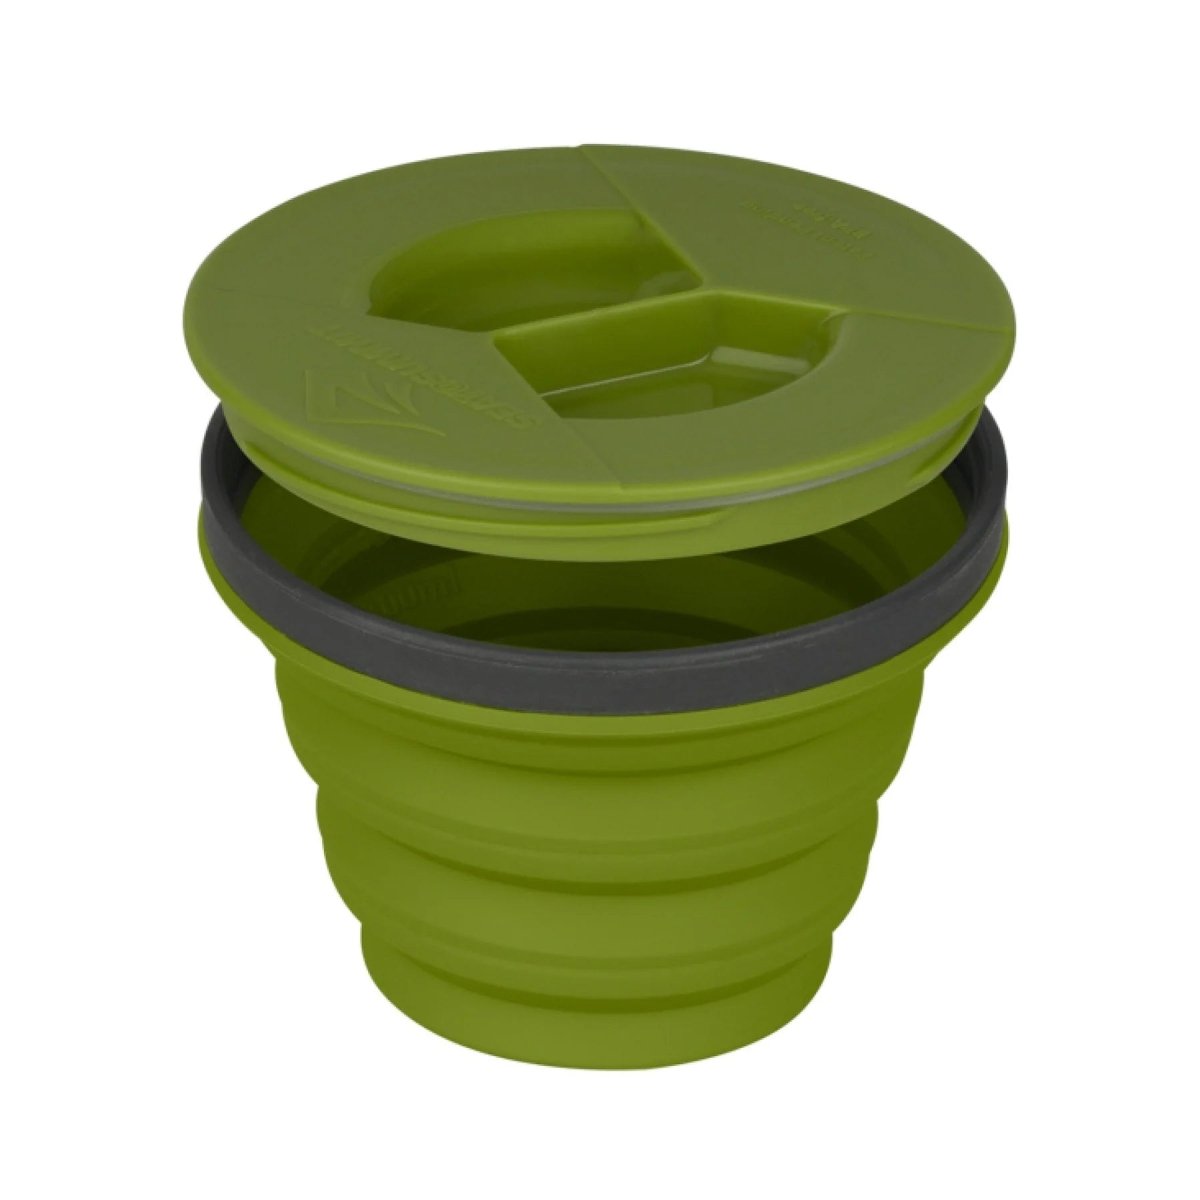 Sea to Summit X-Seal & Go Container - Small Olive | Sea to Summit | A247 Gear